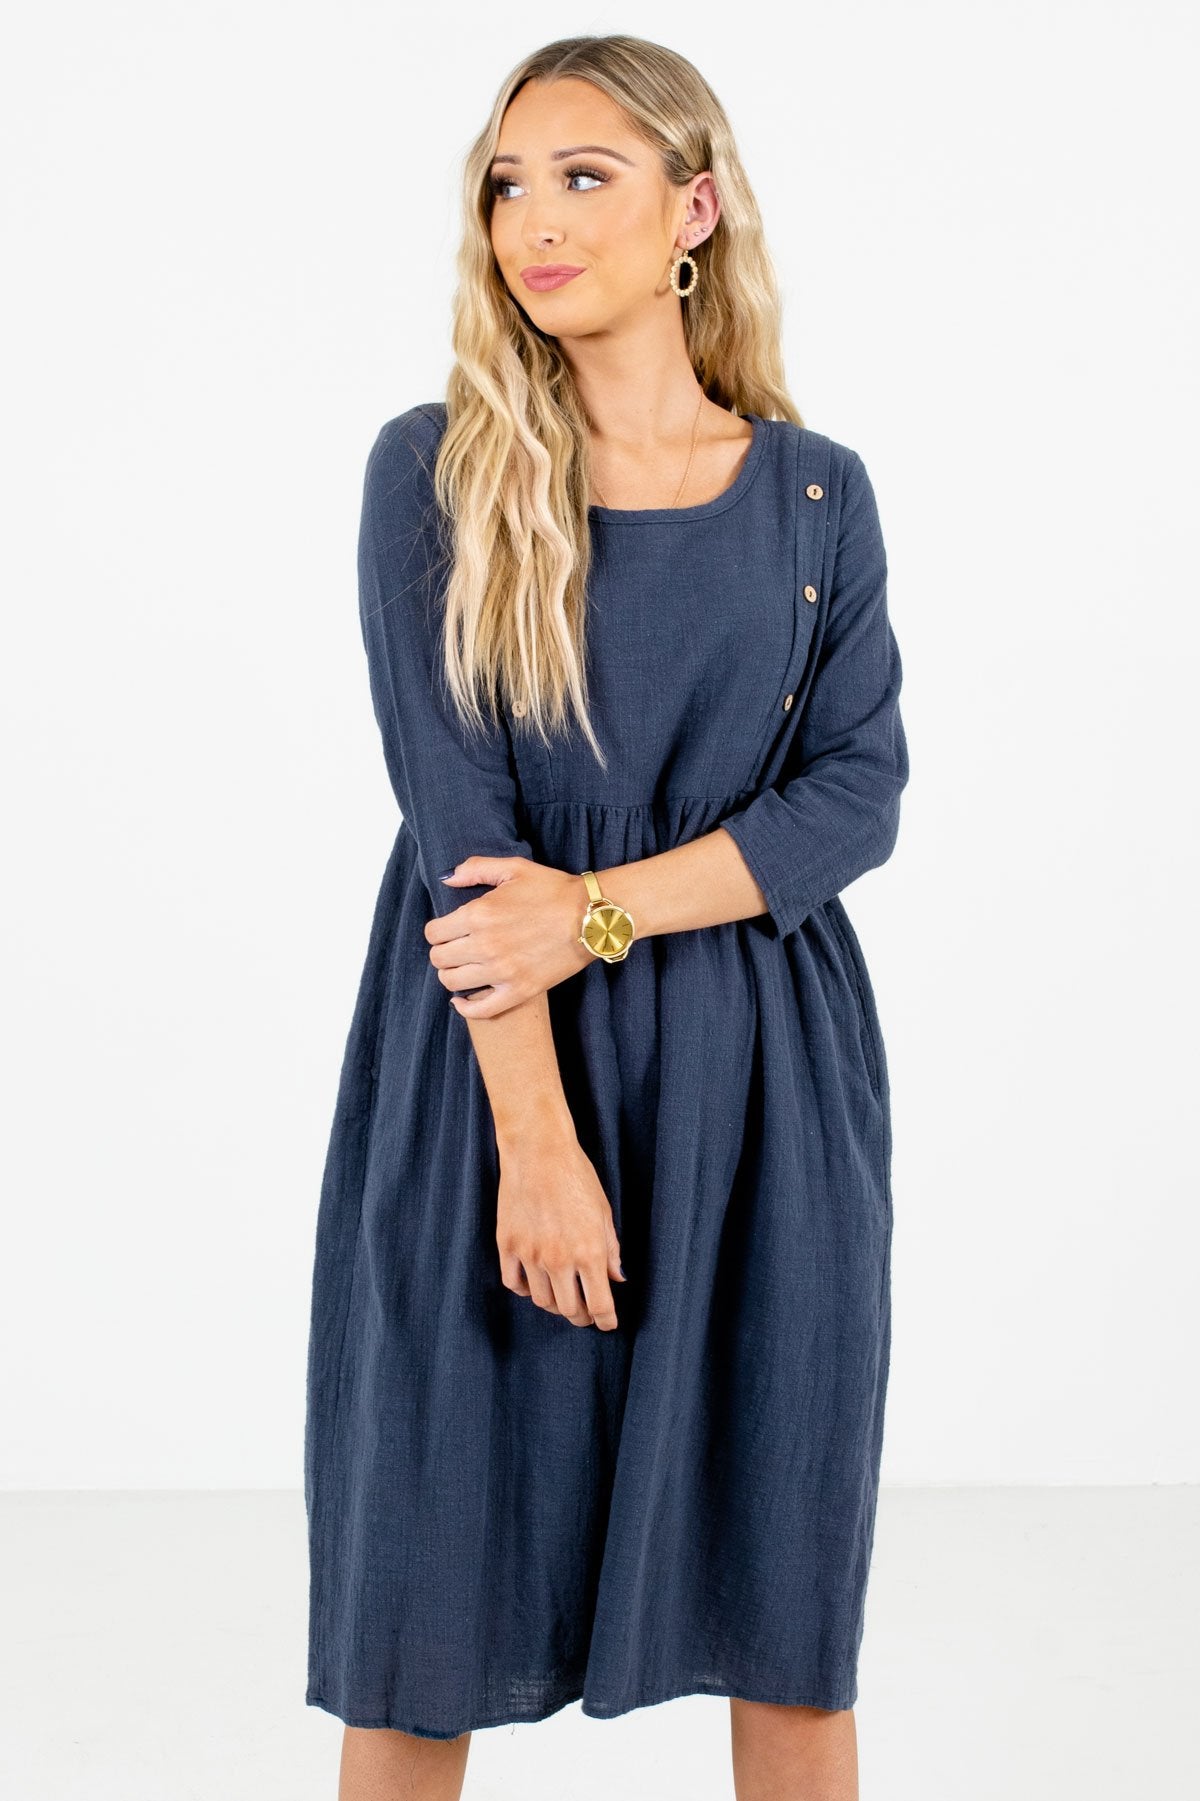 Women’s Blue Boutique Knee-Length Dress with Pockets